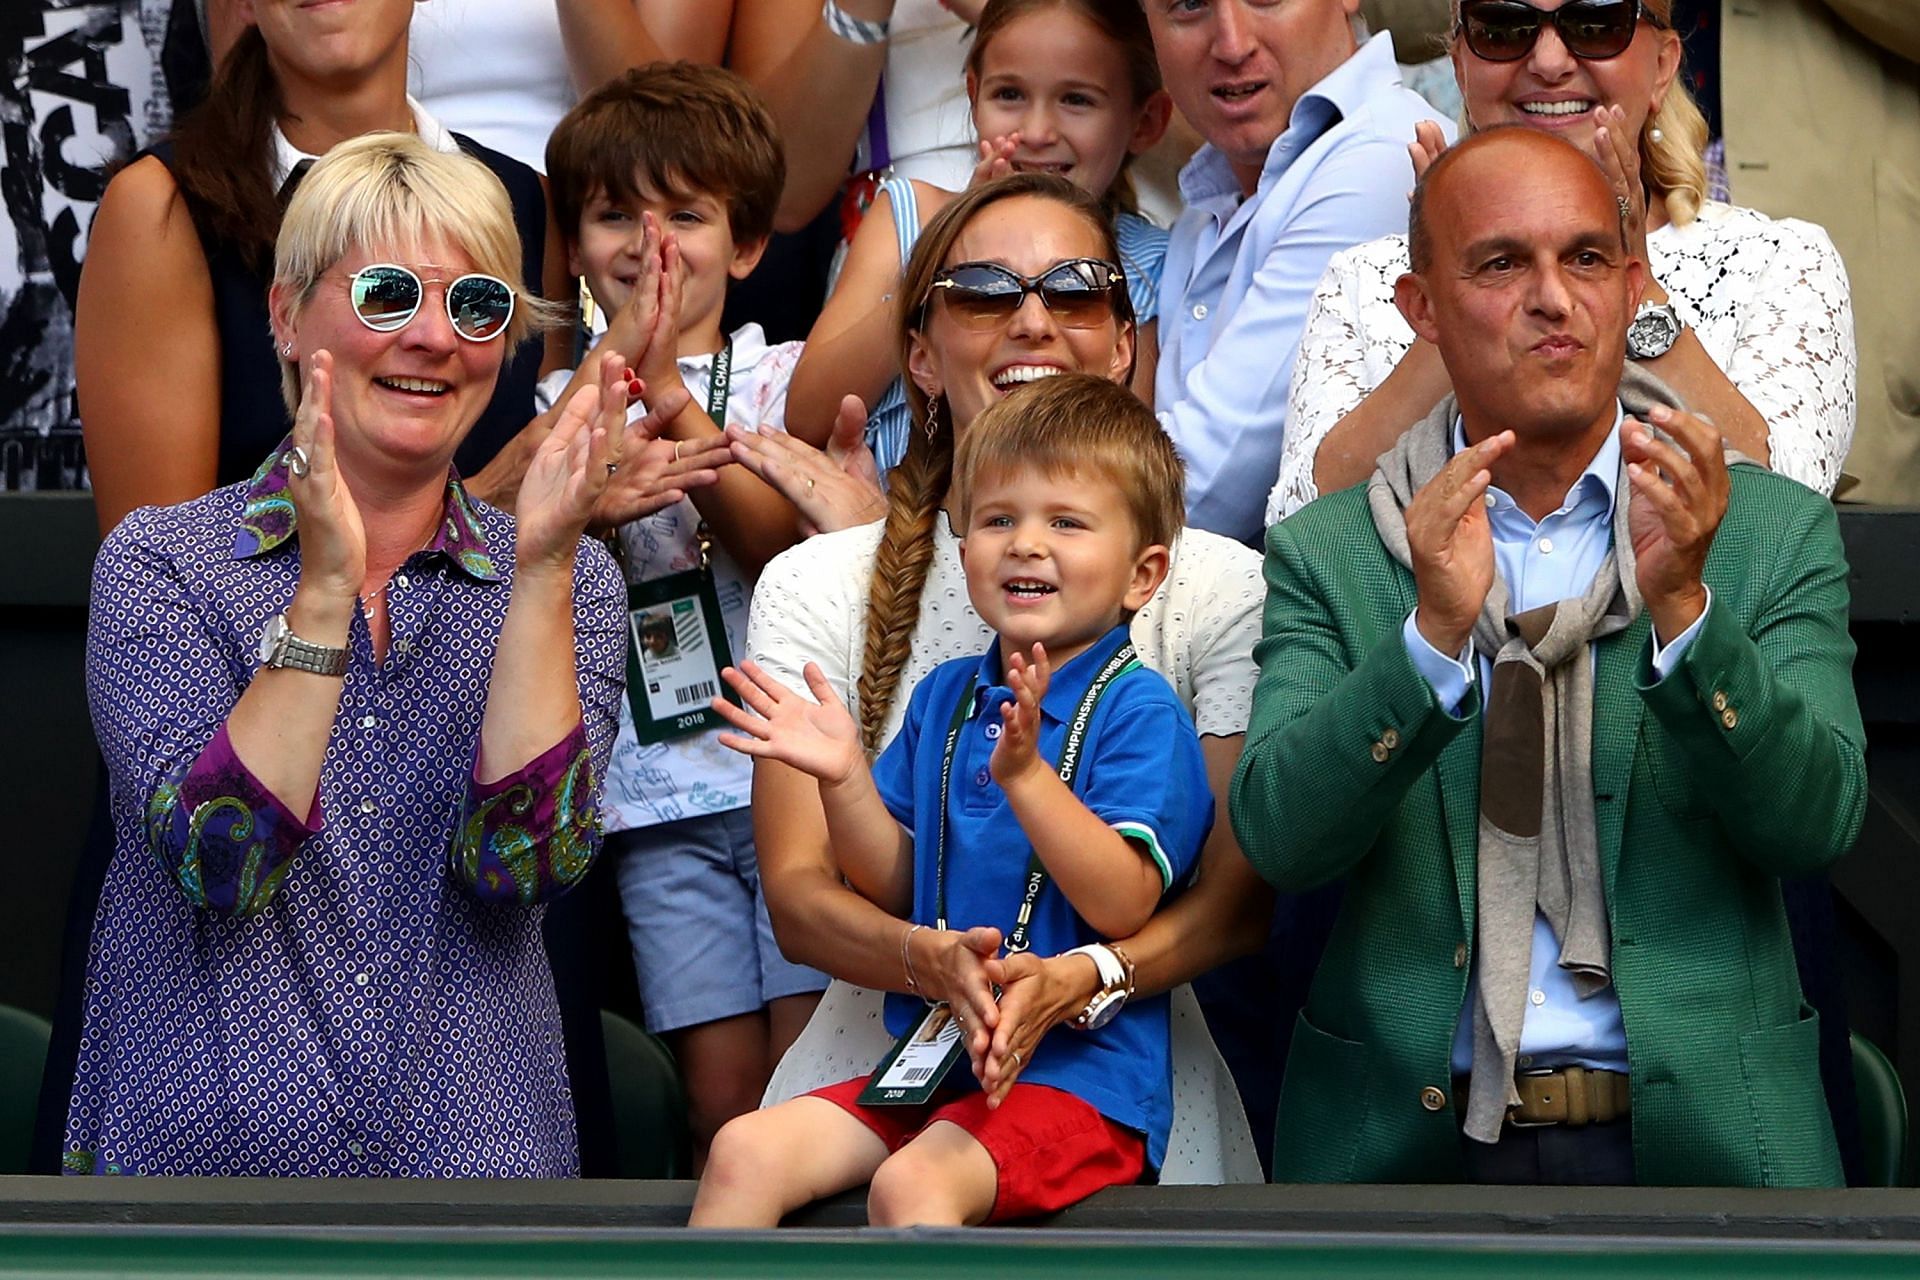 Stefan Djokovic applauding his father at the 2018 Wimbledon Championships